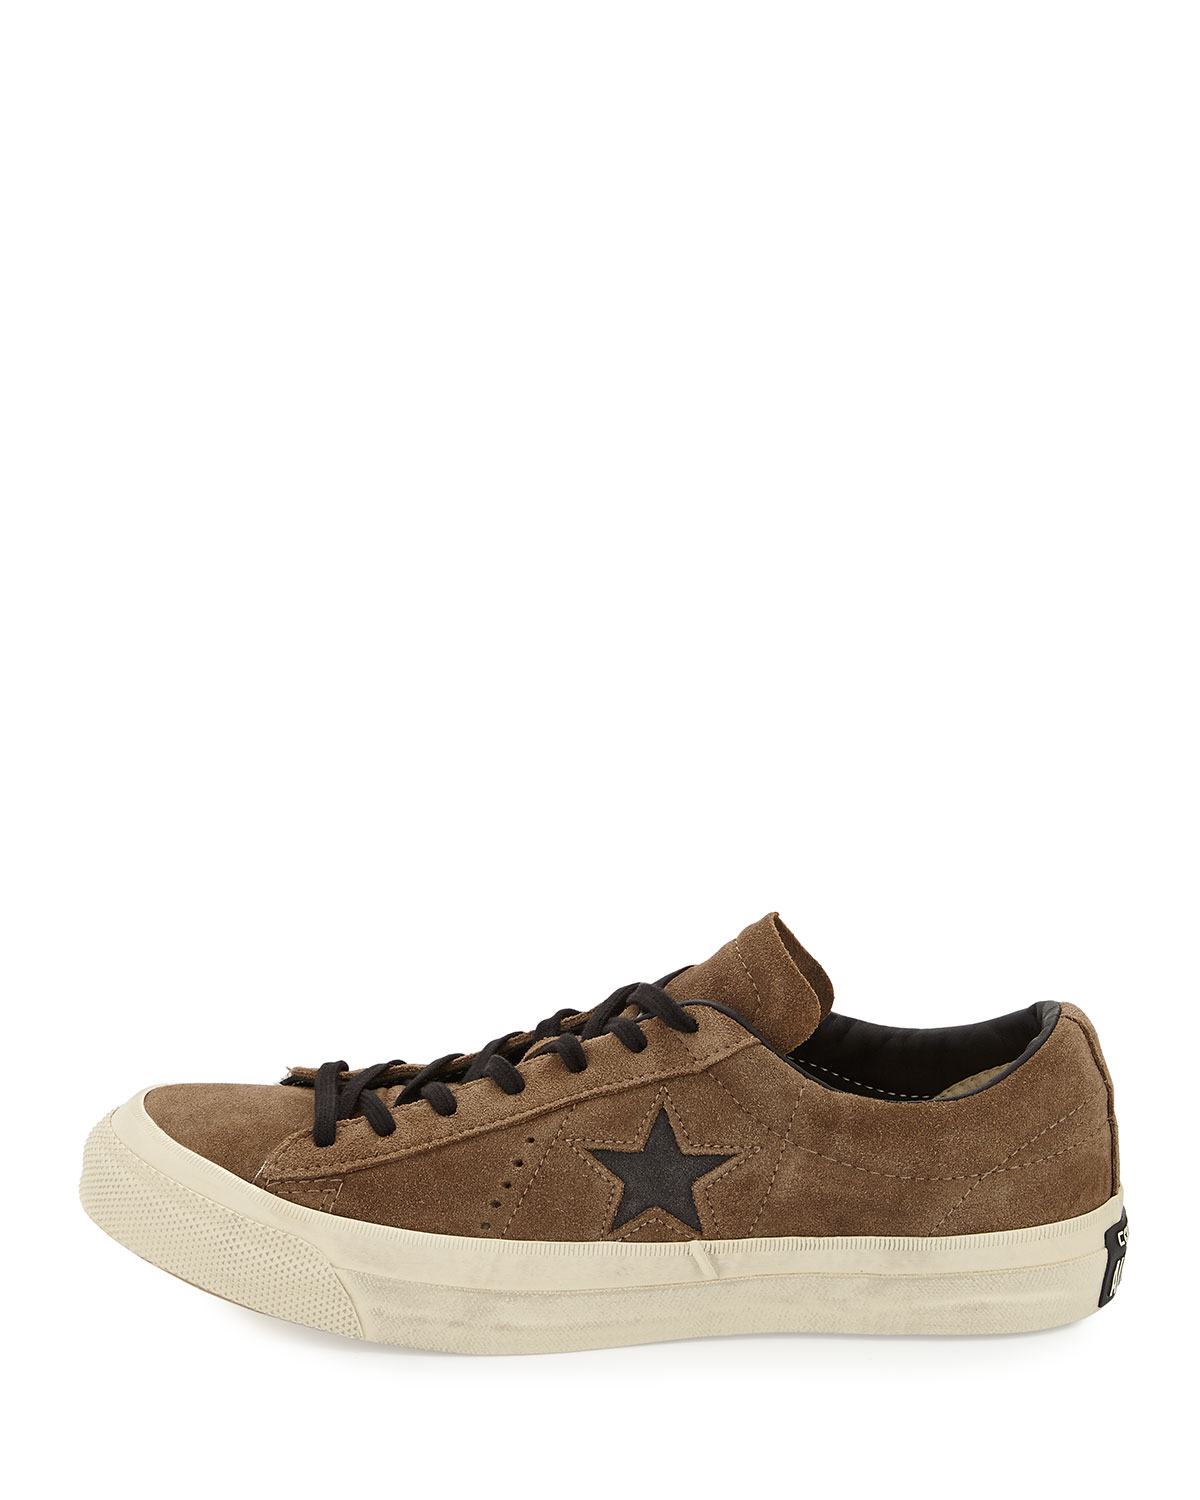 Lyst - Converse Star Suede Cut-Out Low-Top Sneaker in Brown for Men